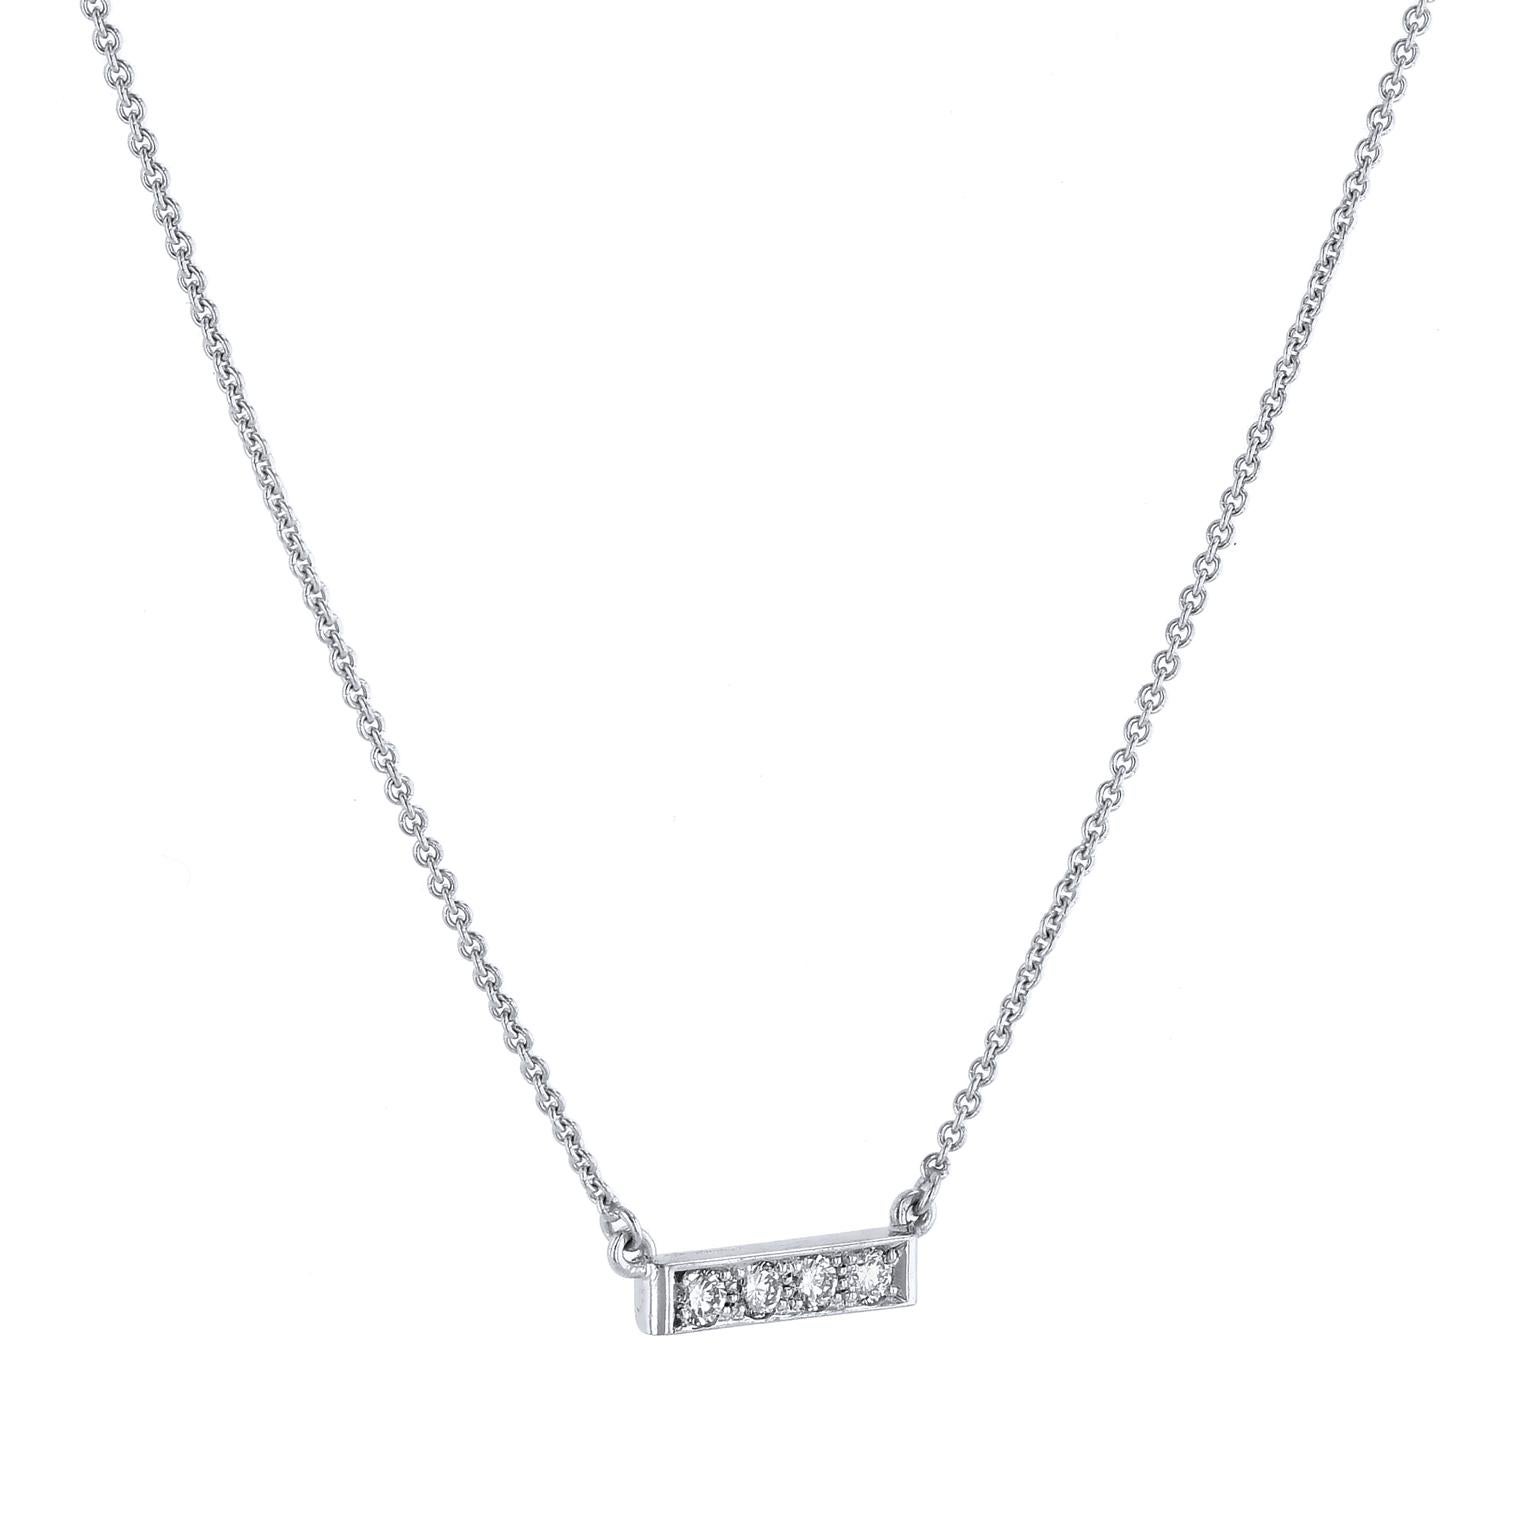 Raise the bar in your everyday look with this 18 karat white gold pendant adorned with pave set diamonds (0.09 carats in total weight, F/G VS).